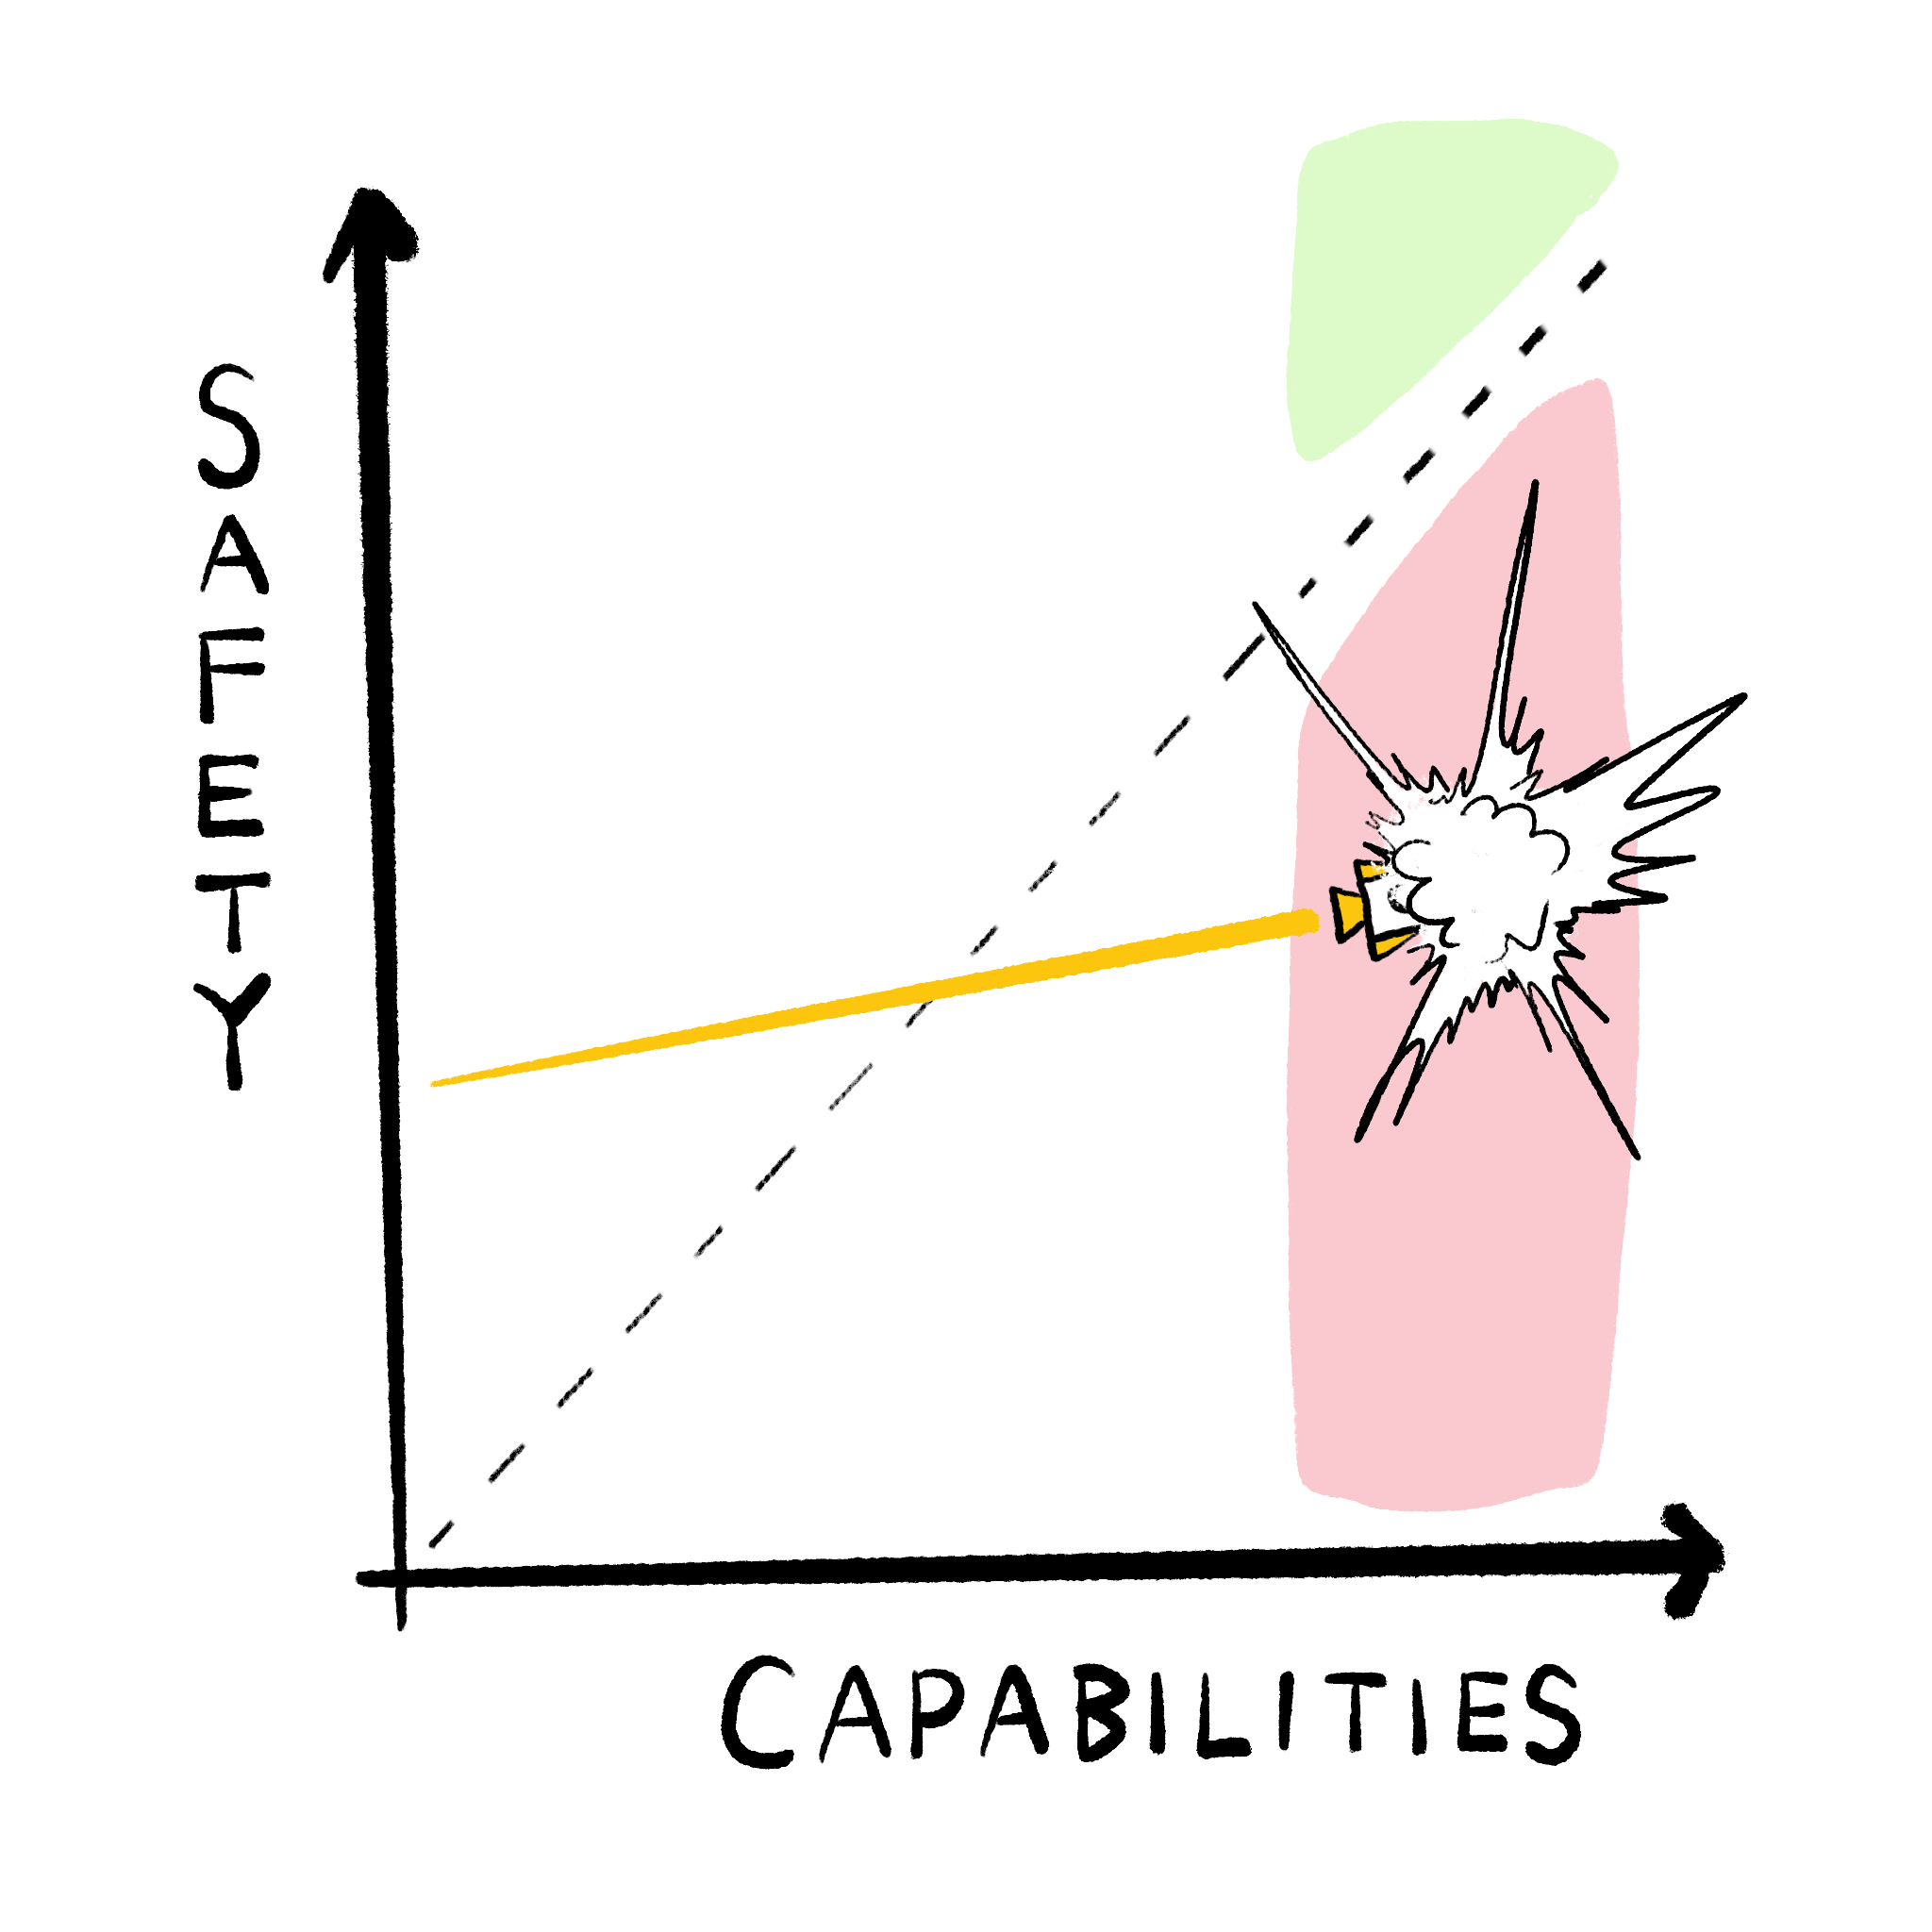 Same graph, except rocket hits The Bad Place